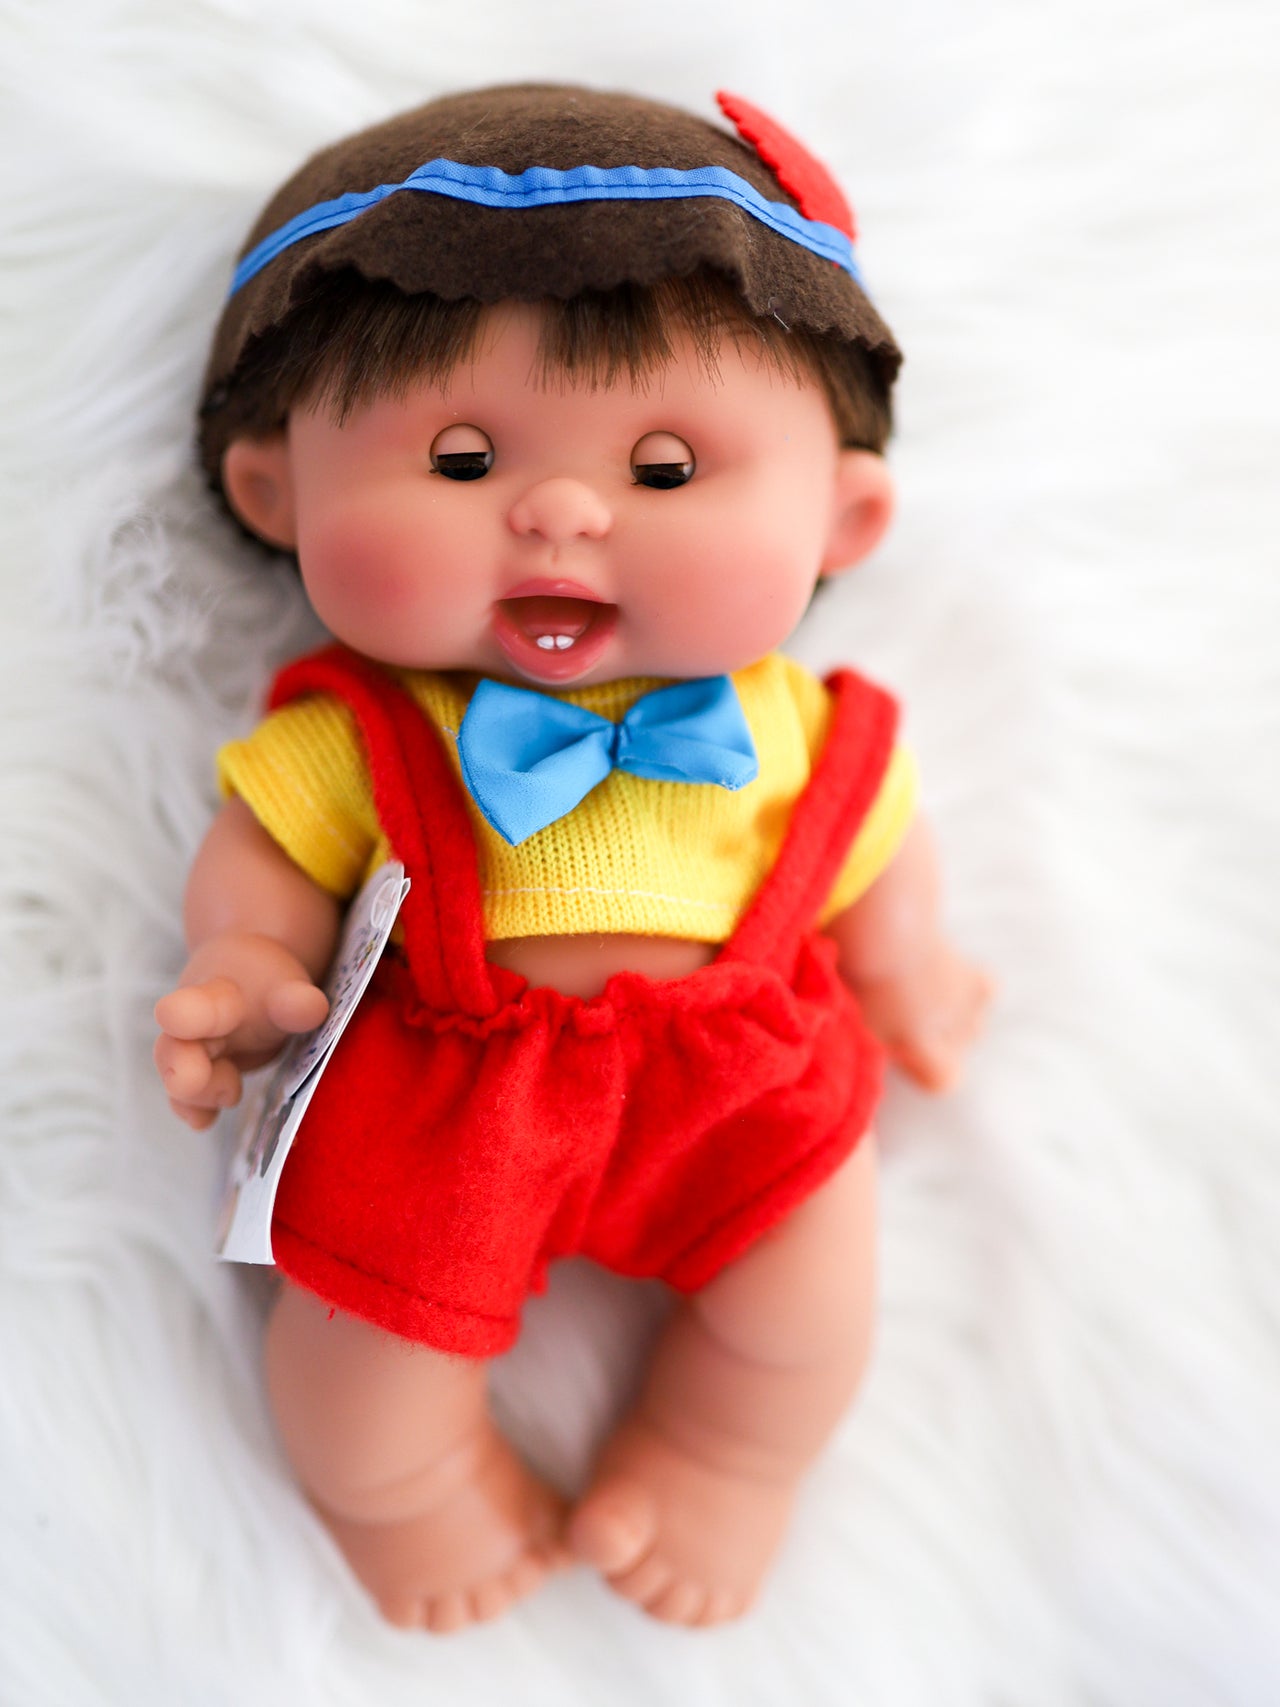 Pinocchio - Fairy Tale Pepotes Boy Doll with Sleepy Eyes